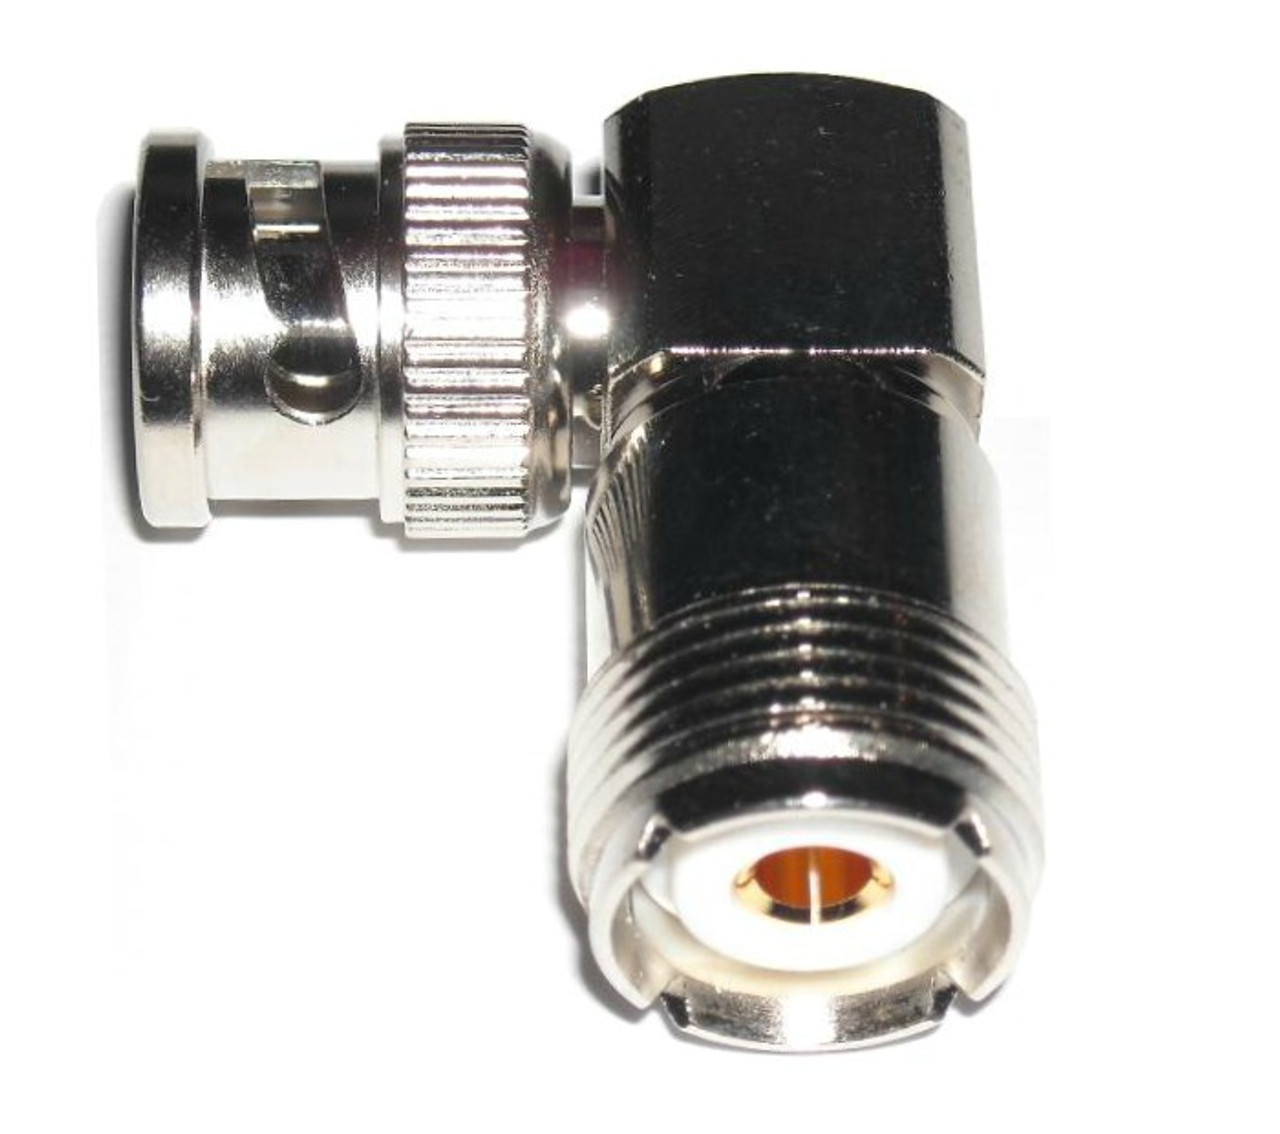 BNC-Male to UHF-Female Right Angle Coaxial Adapter Connector ARS-G060-RA